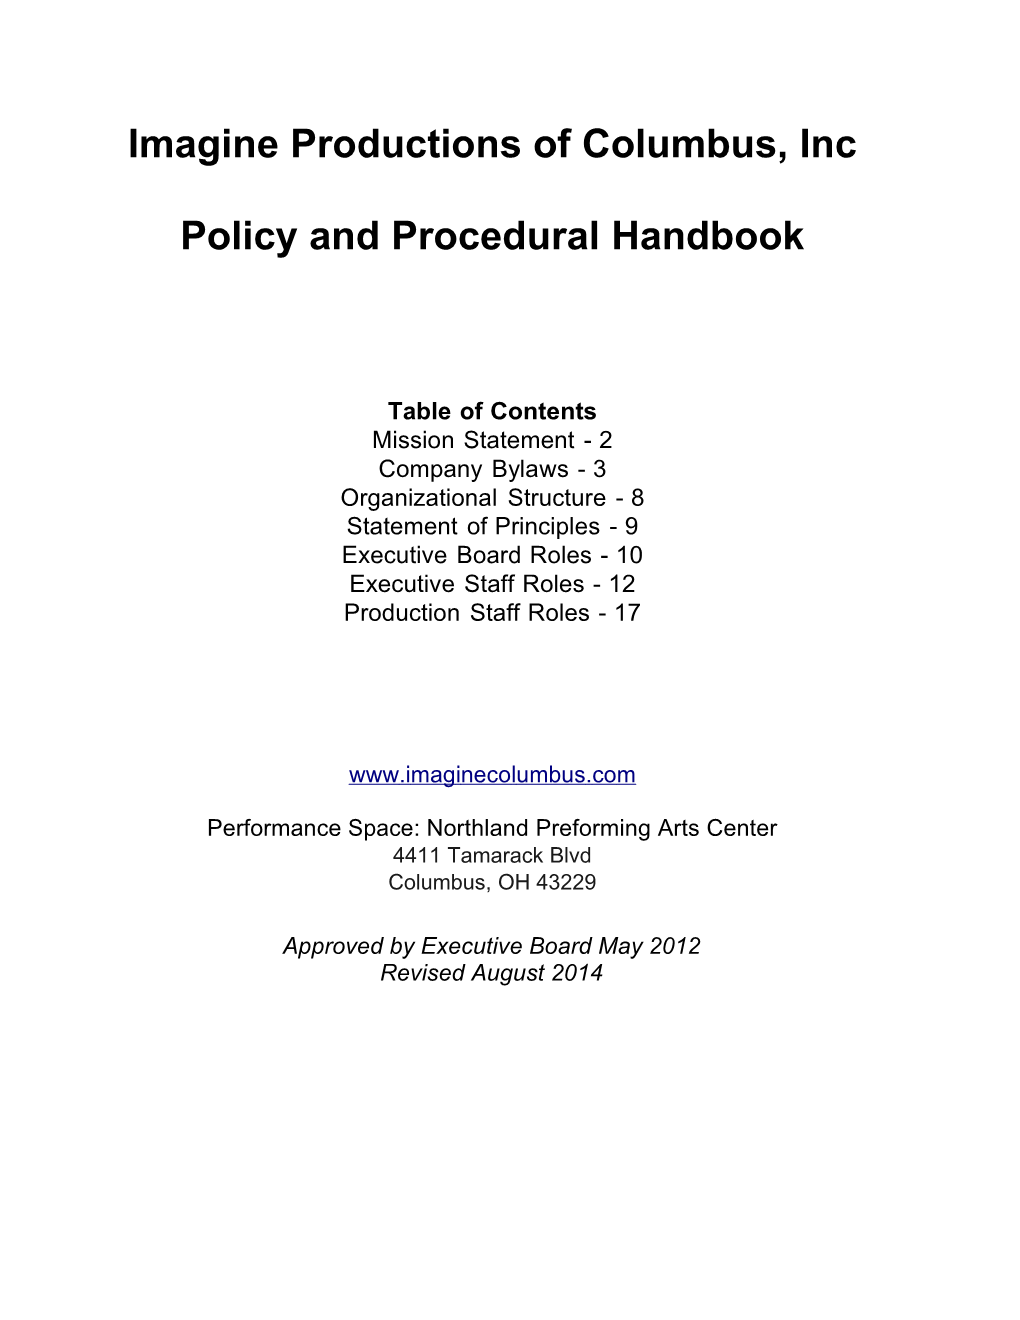 Imagine Productions Policy and Procedural Handbook-1